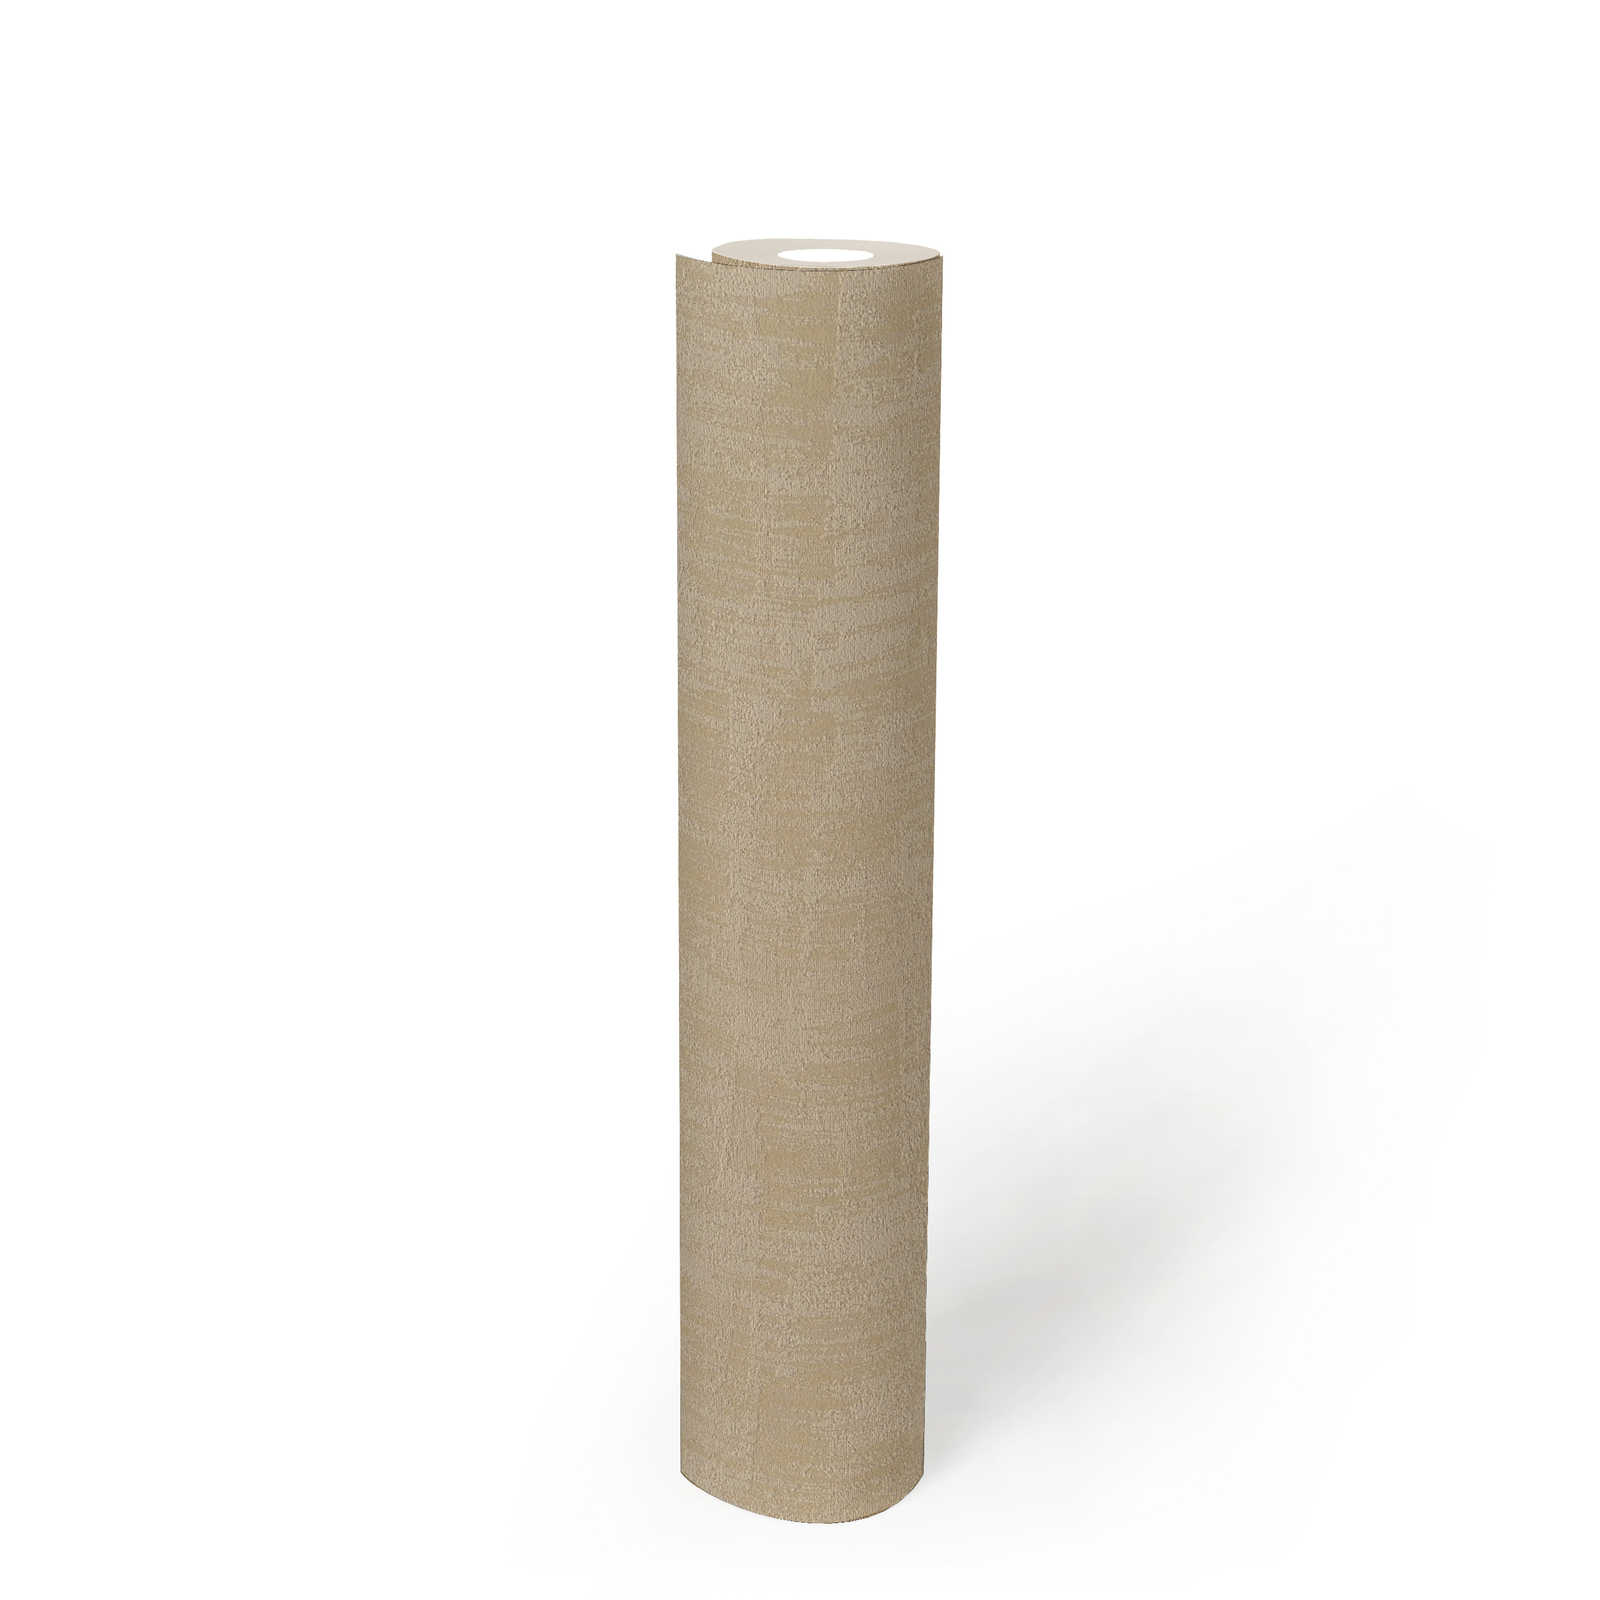             Wallpaper with abstract raffia pattern in soft colours - beige, taupe
        